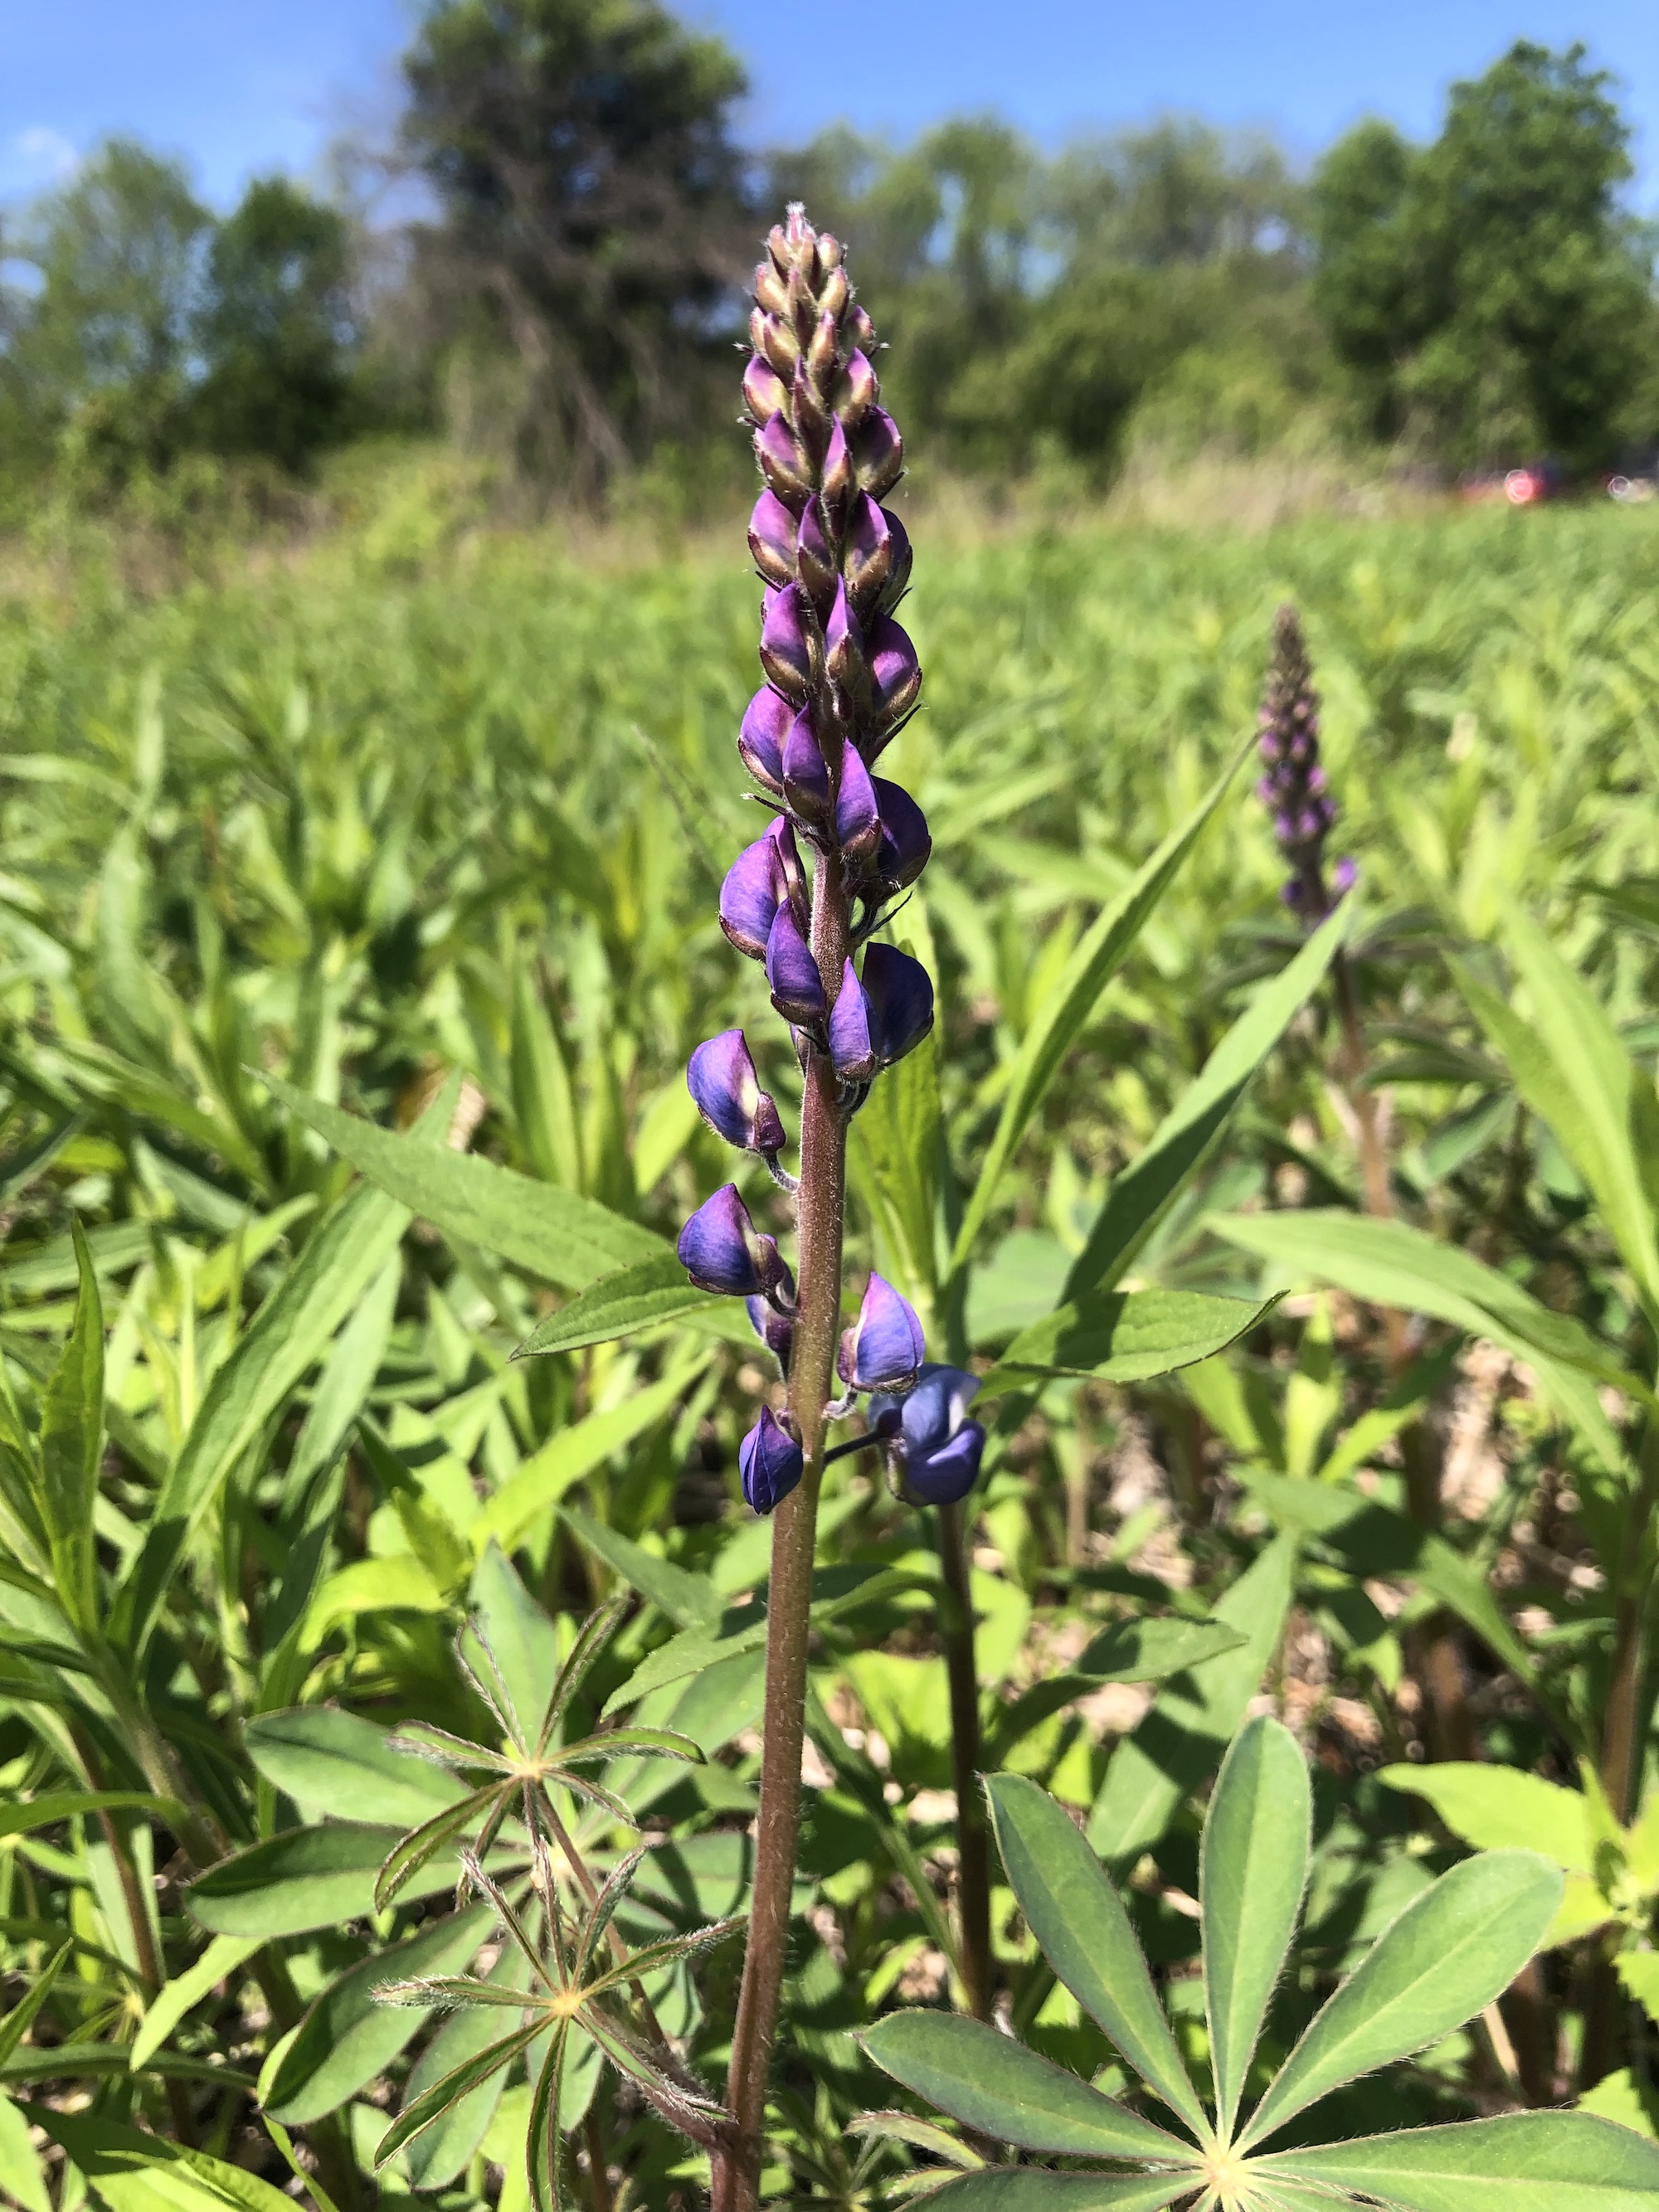 Wild Lupine in the UW-Madison Arboretum Curtis Prairie in Madison, Wisconsin on May 22, 2021.